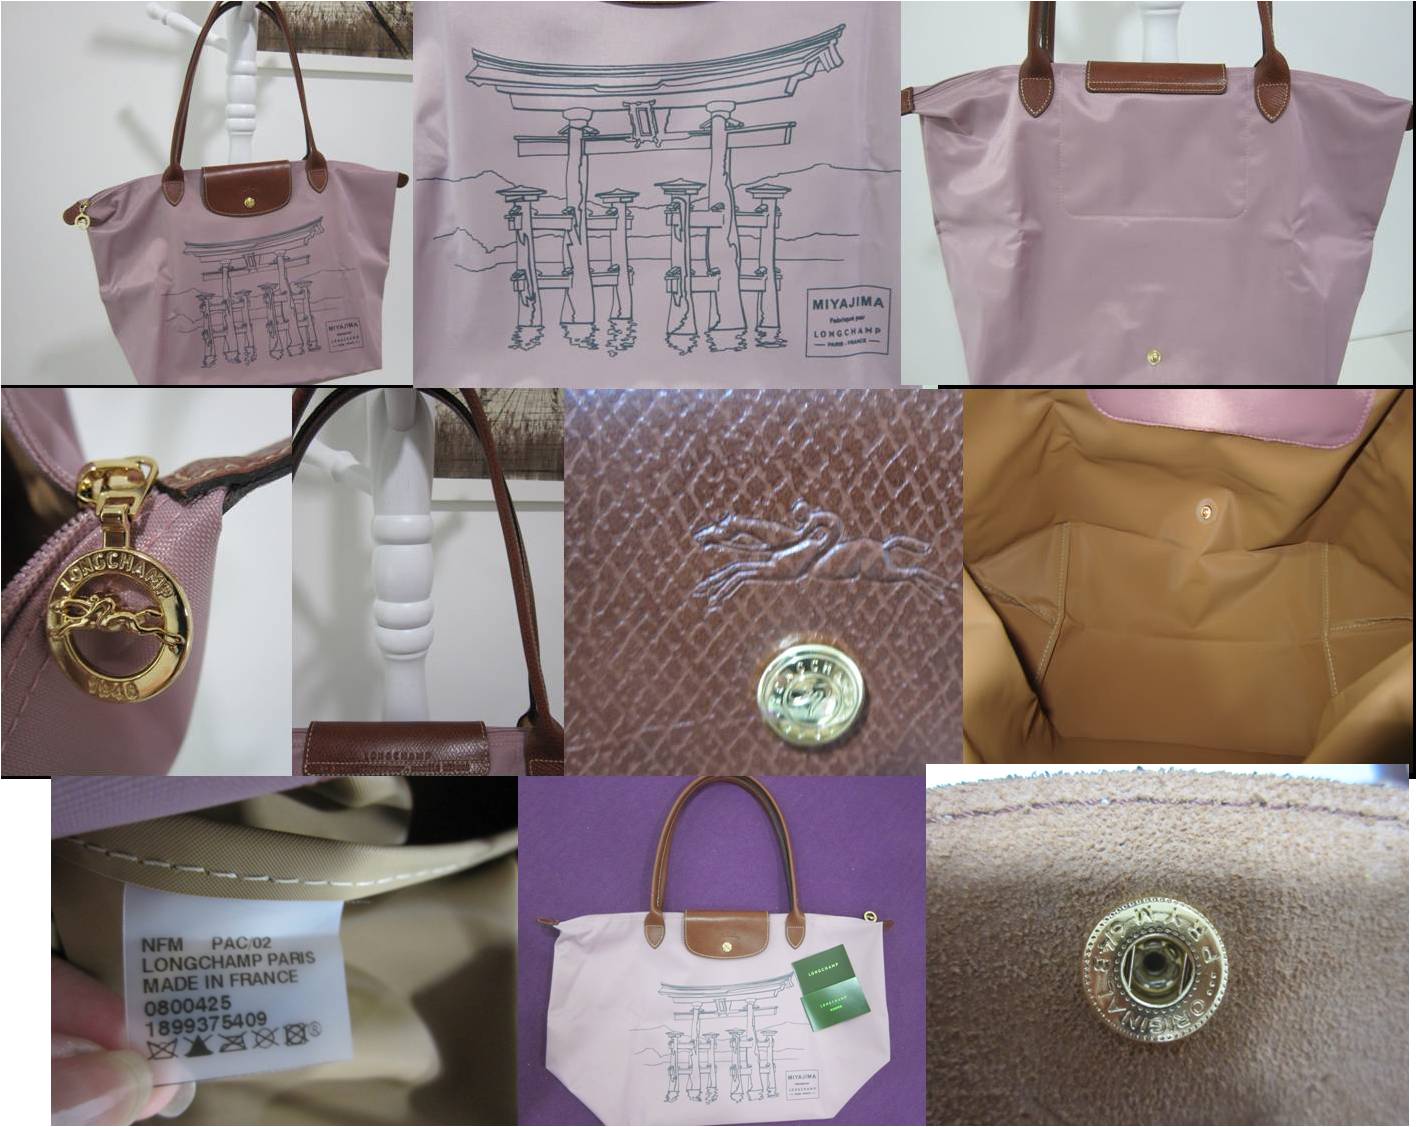 The Bags Affairs ~ Satisfy your lust for designer bags: LONGCHAMP JAPAN LIMITED EDITION MIYAJIMA ...